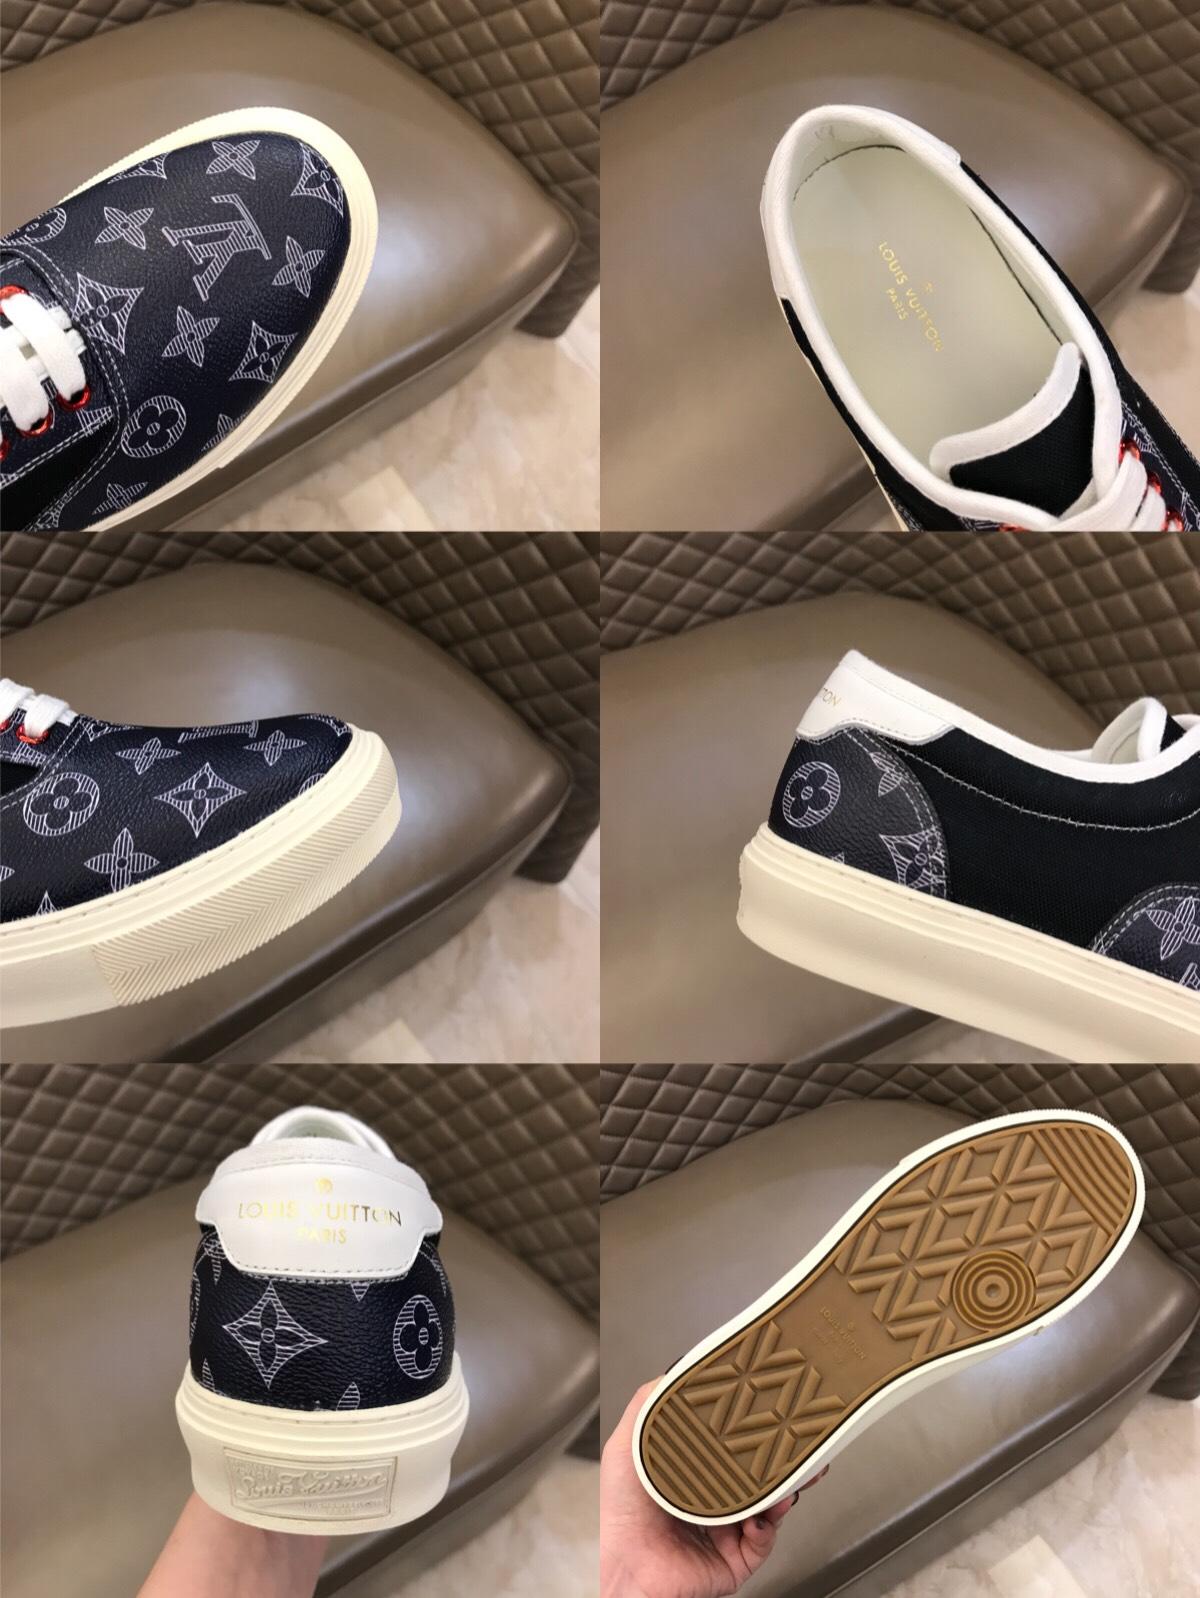 lv Fashion Sneakers Black and Monogram Flower print and white sole MS02886